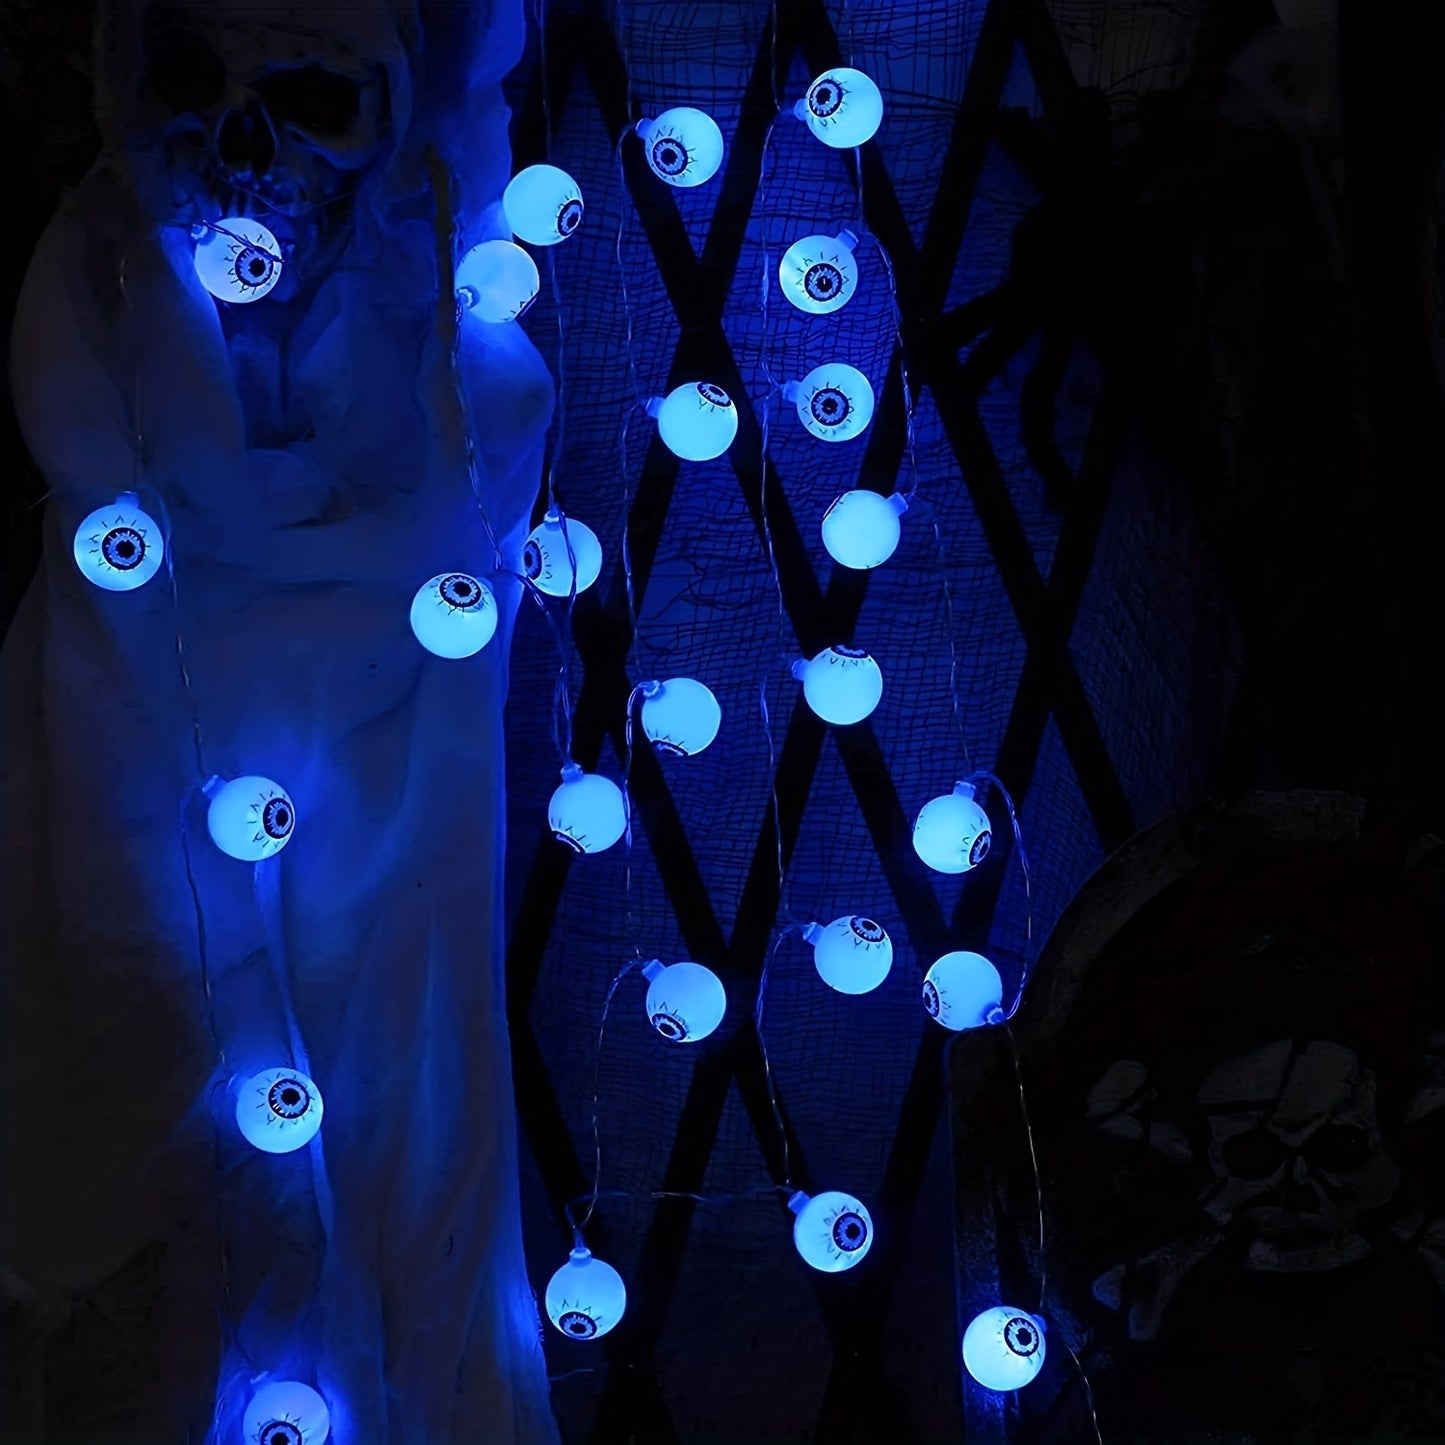 1pc, LED Halloween Eyeball String Lights, Battery Operated Halloween Decoration Lights Halloween Lights Indoor/Outdoor, For Party Garden Fireplace Decor (Blue)